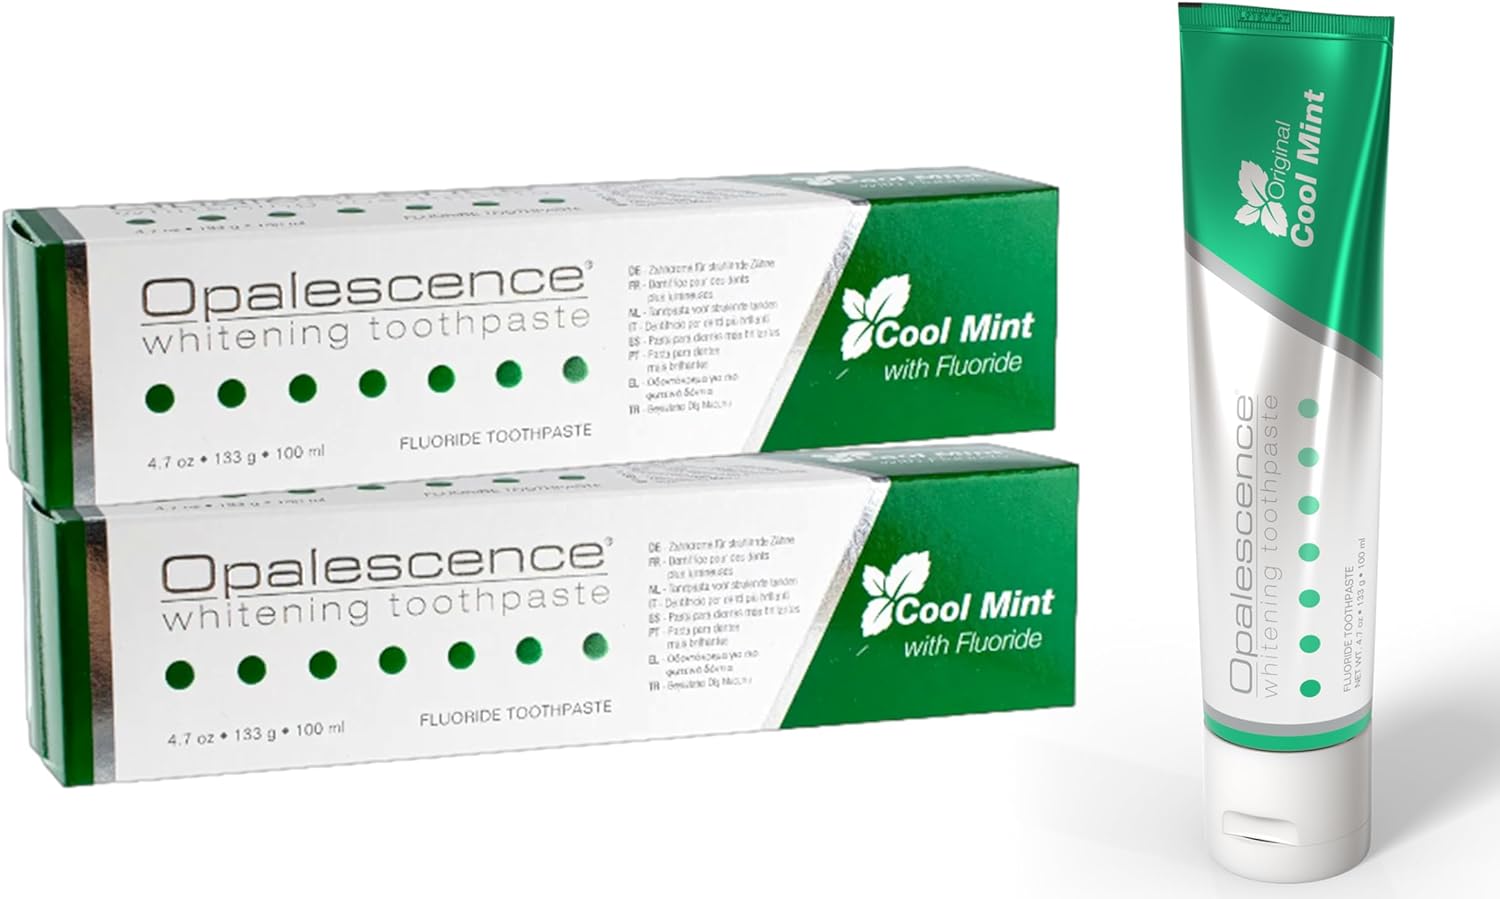 Opalescence Teeth Whitening Toothpaste (Pack of 2) - Cool Mint Original Formula - Oral Care, Gluten-Free - 4.7 Ounce Made by Ultradent.- TP-5166-2